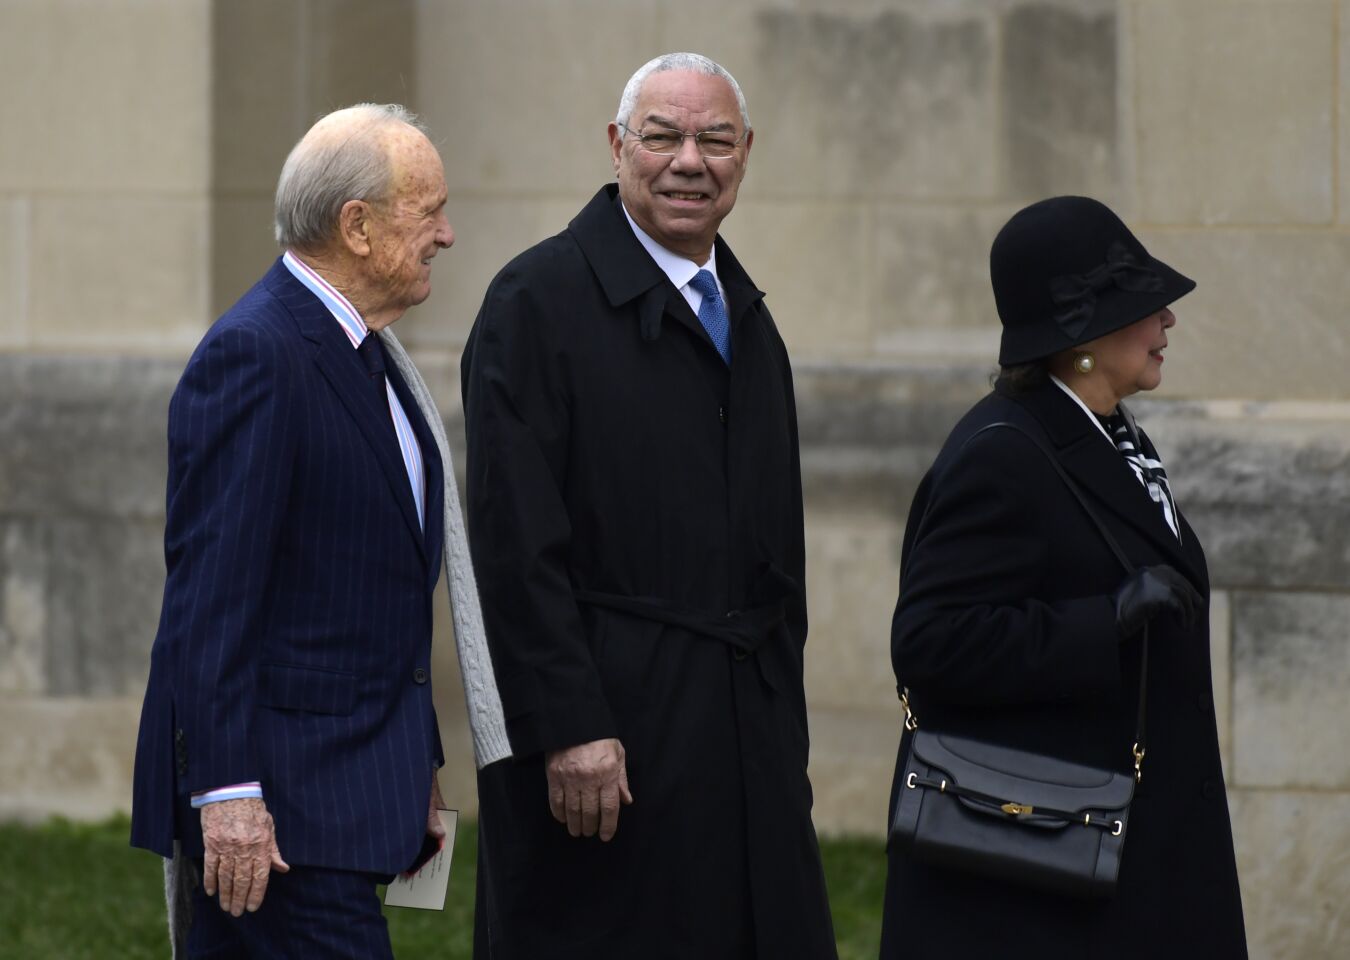 Former Secretary of State Colin Powell walks with two other people